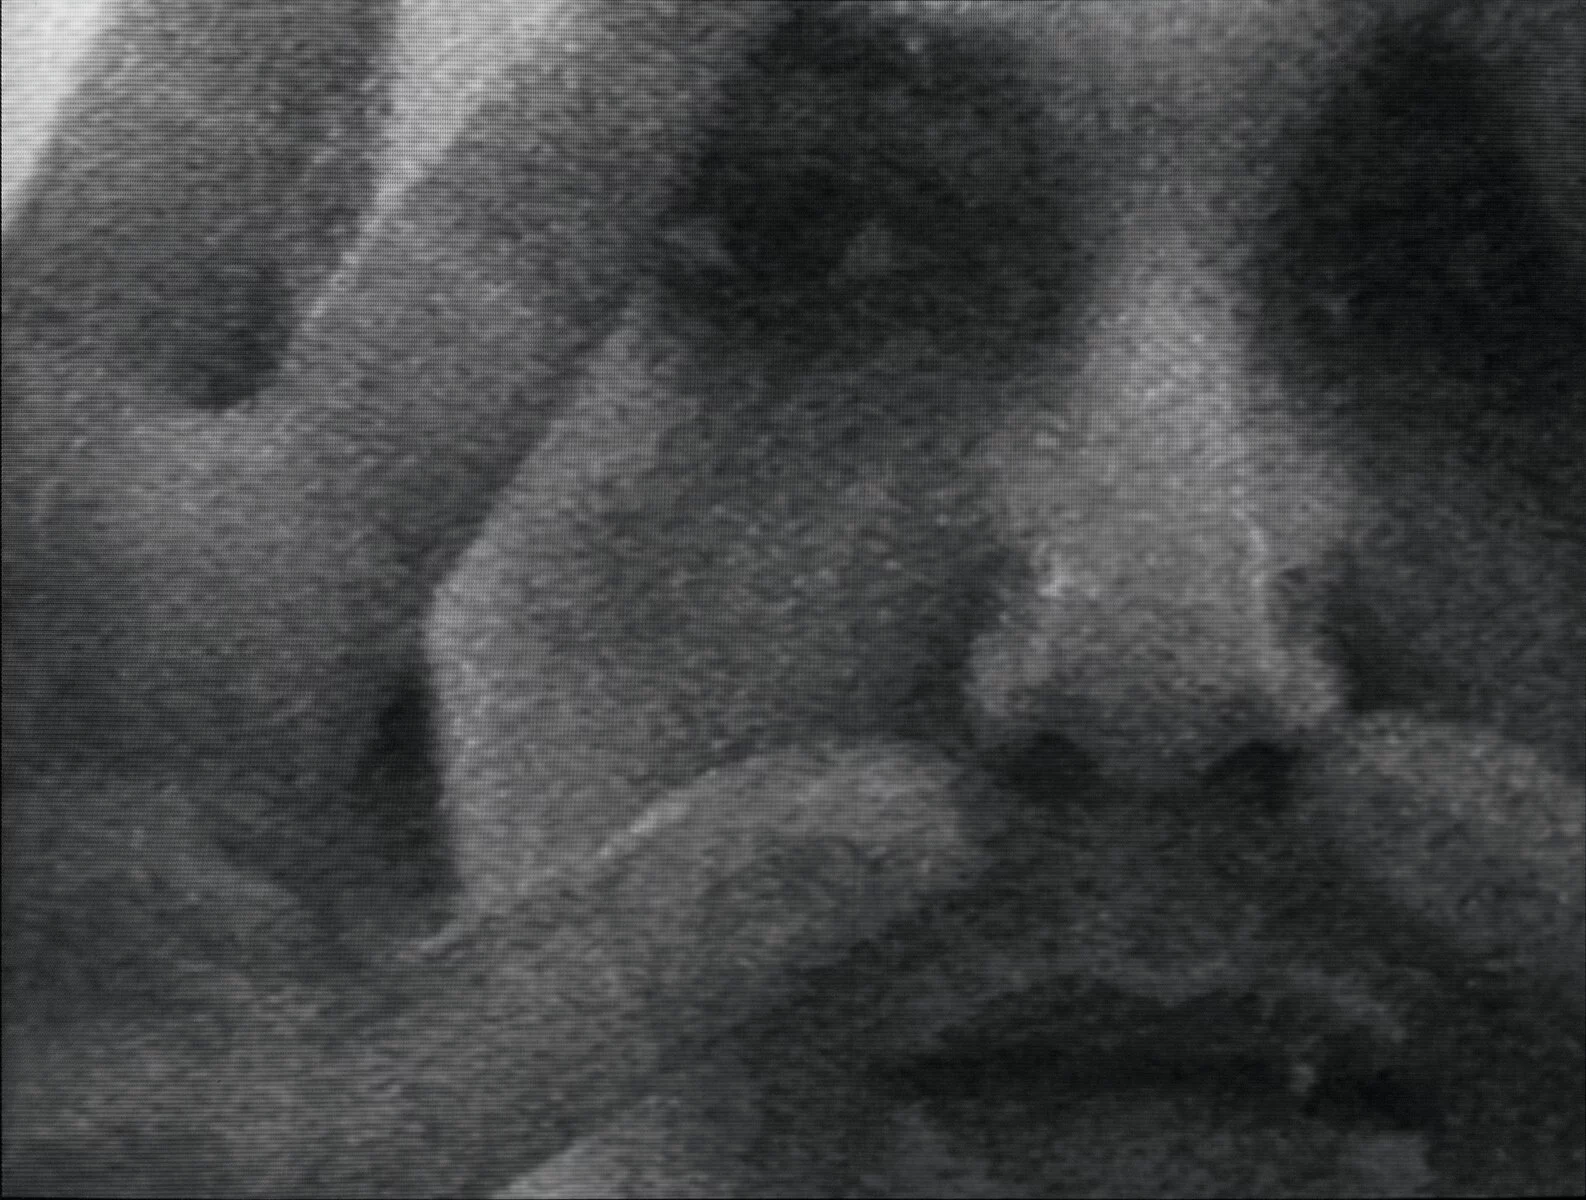 Still image from black and white video.